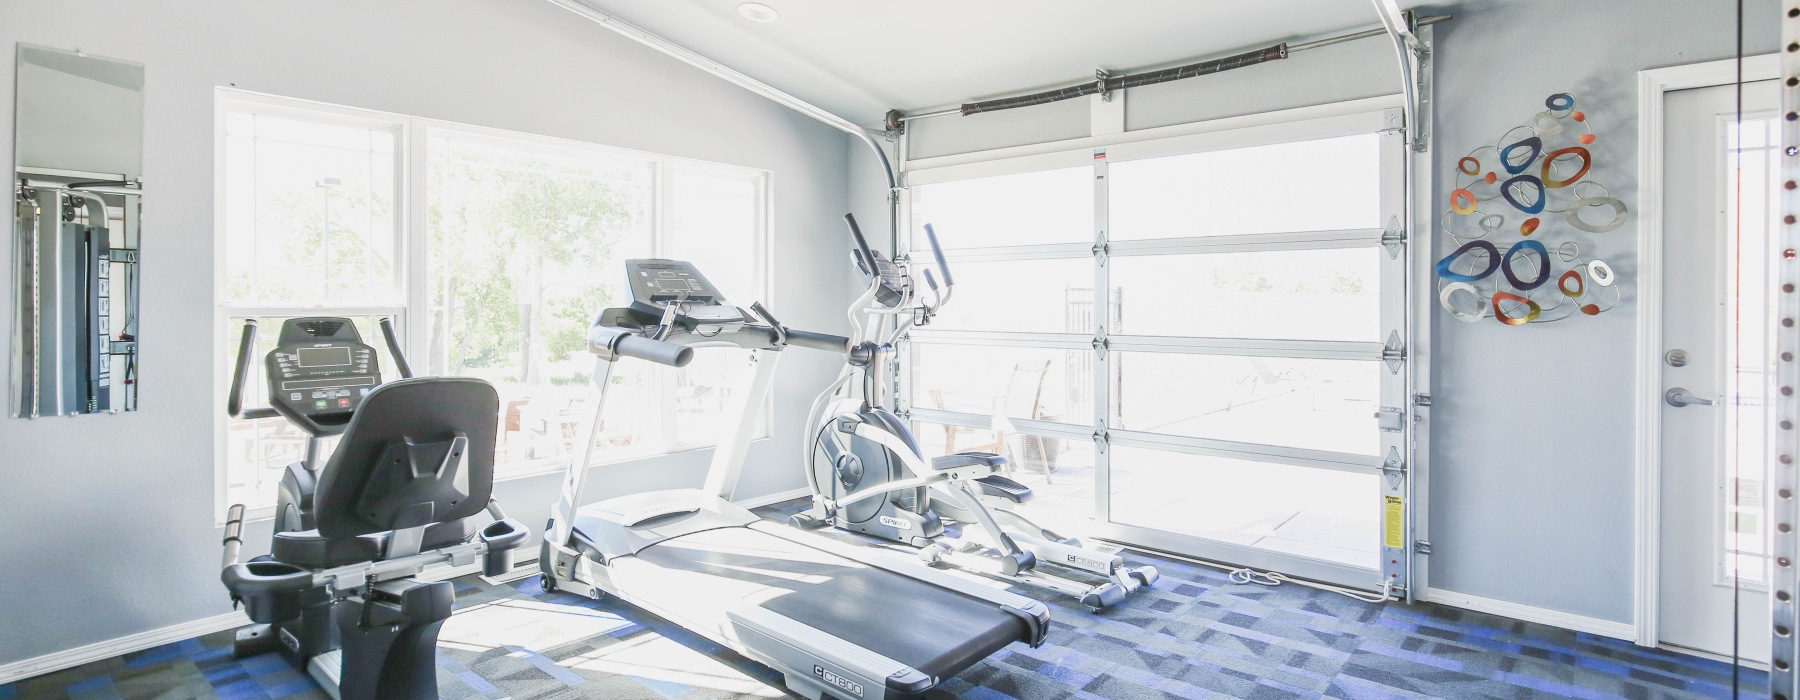 Fitness center with equipment and garage doors